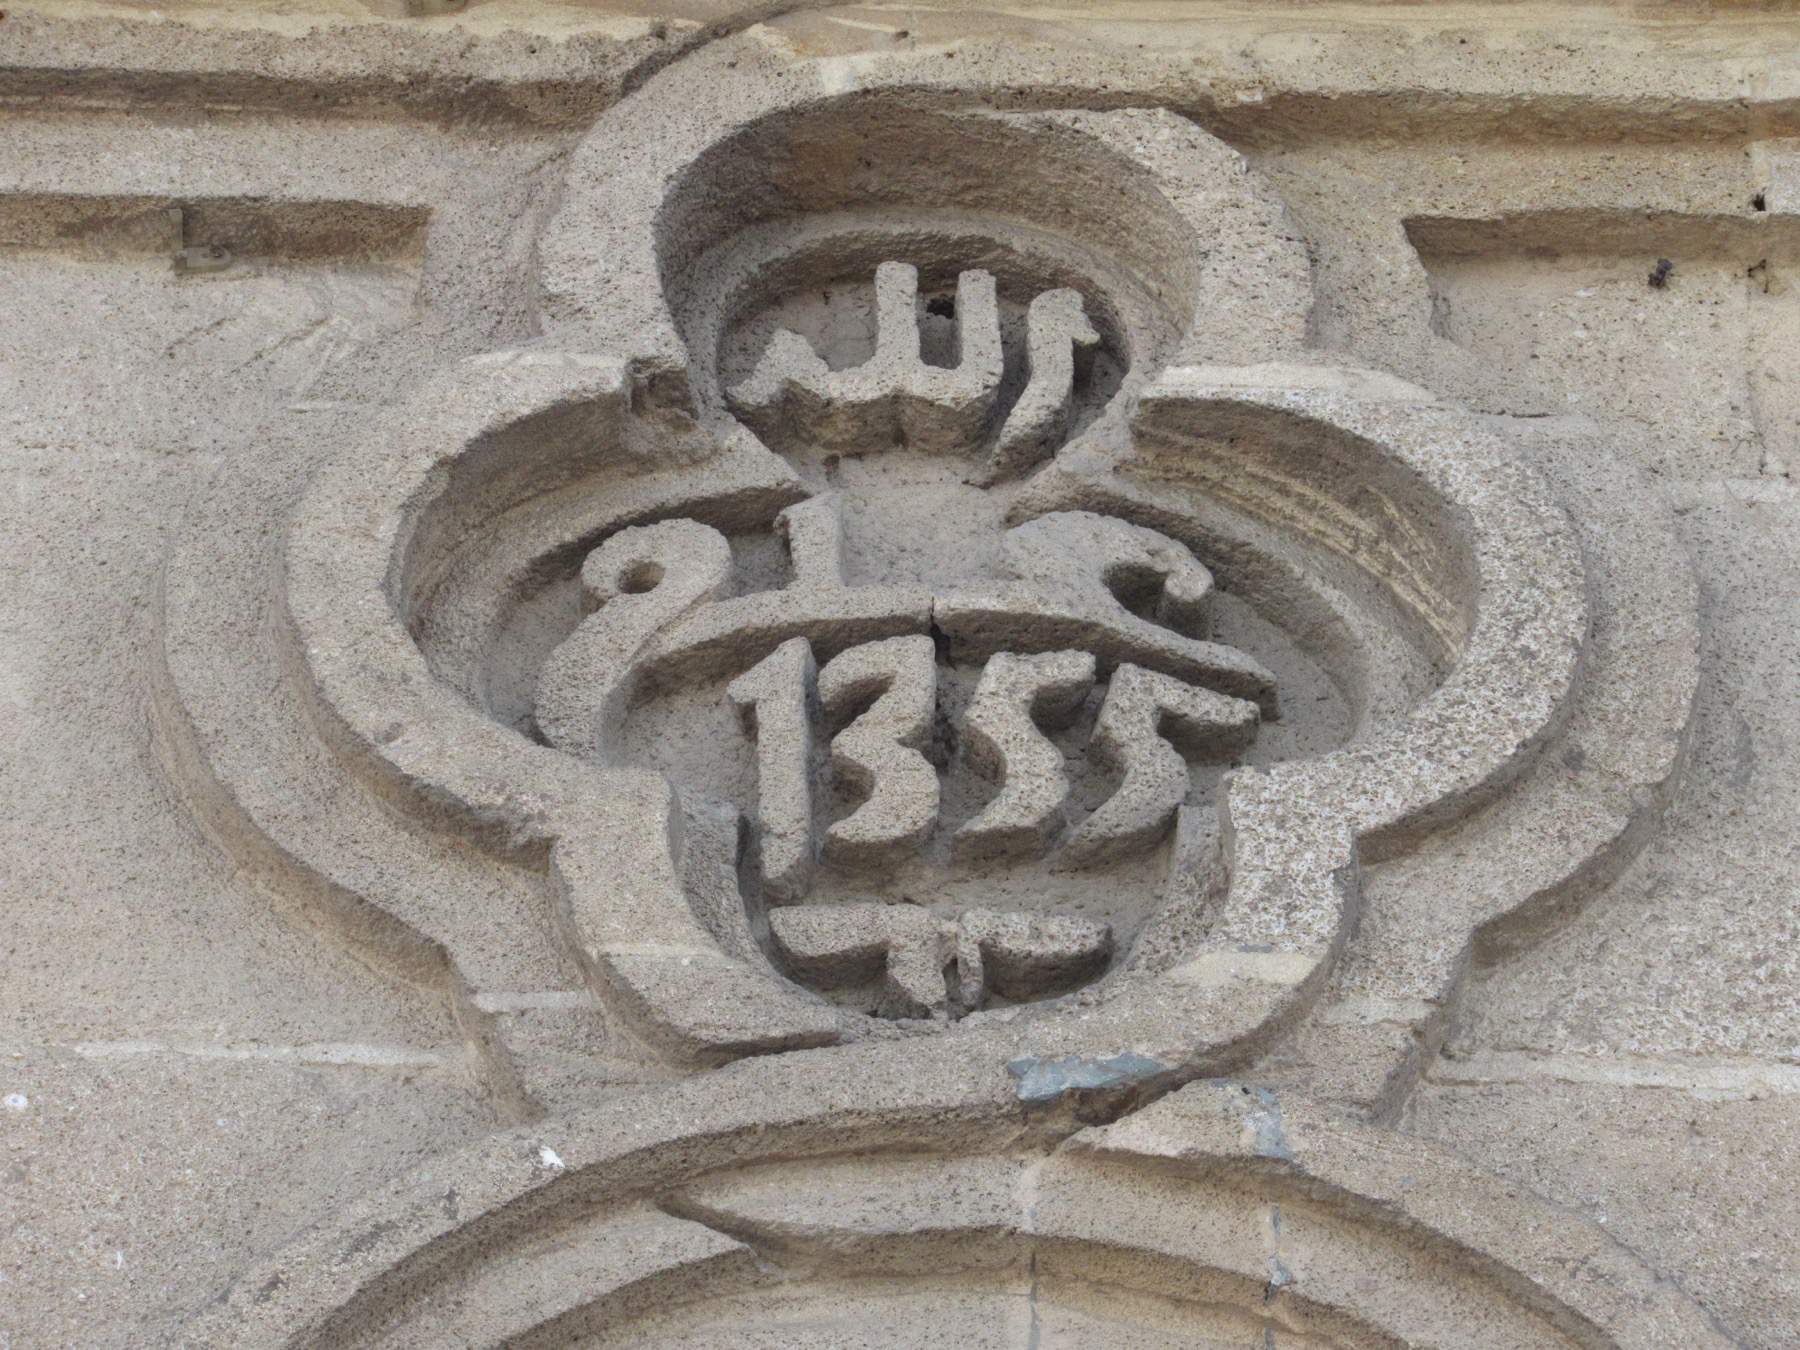 Exterior view of Masjid Mohamedi with entrance stone carving.